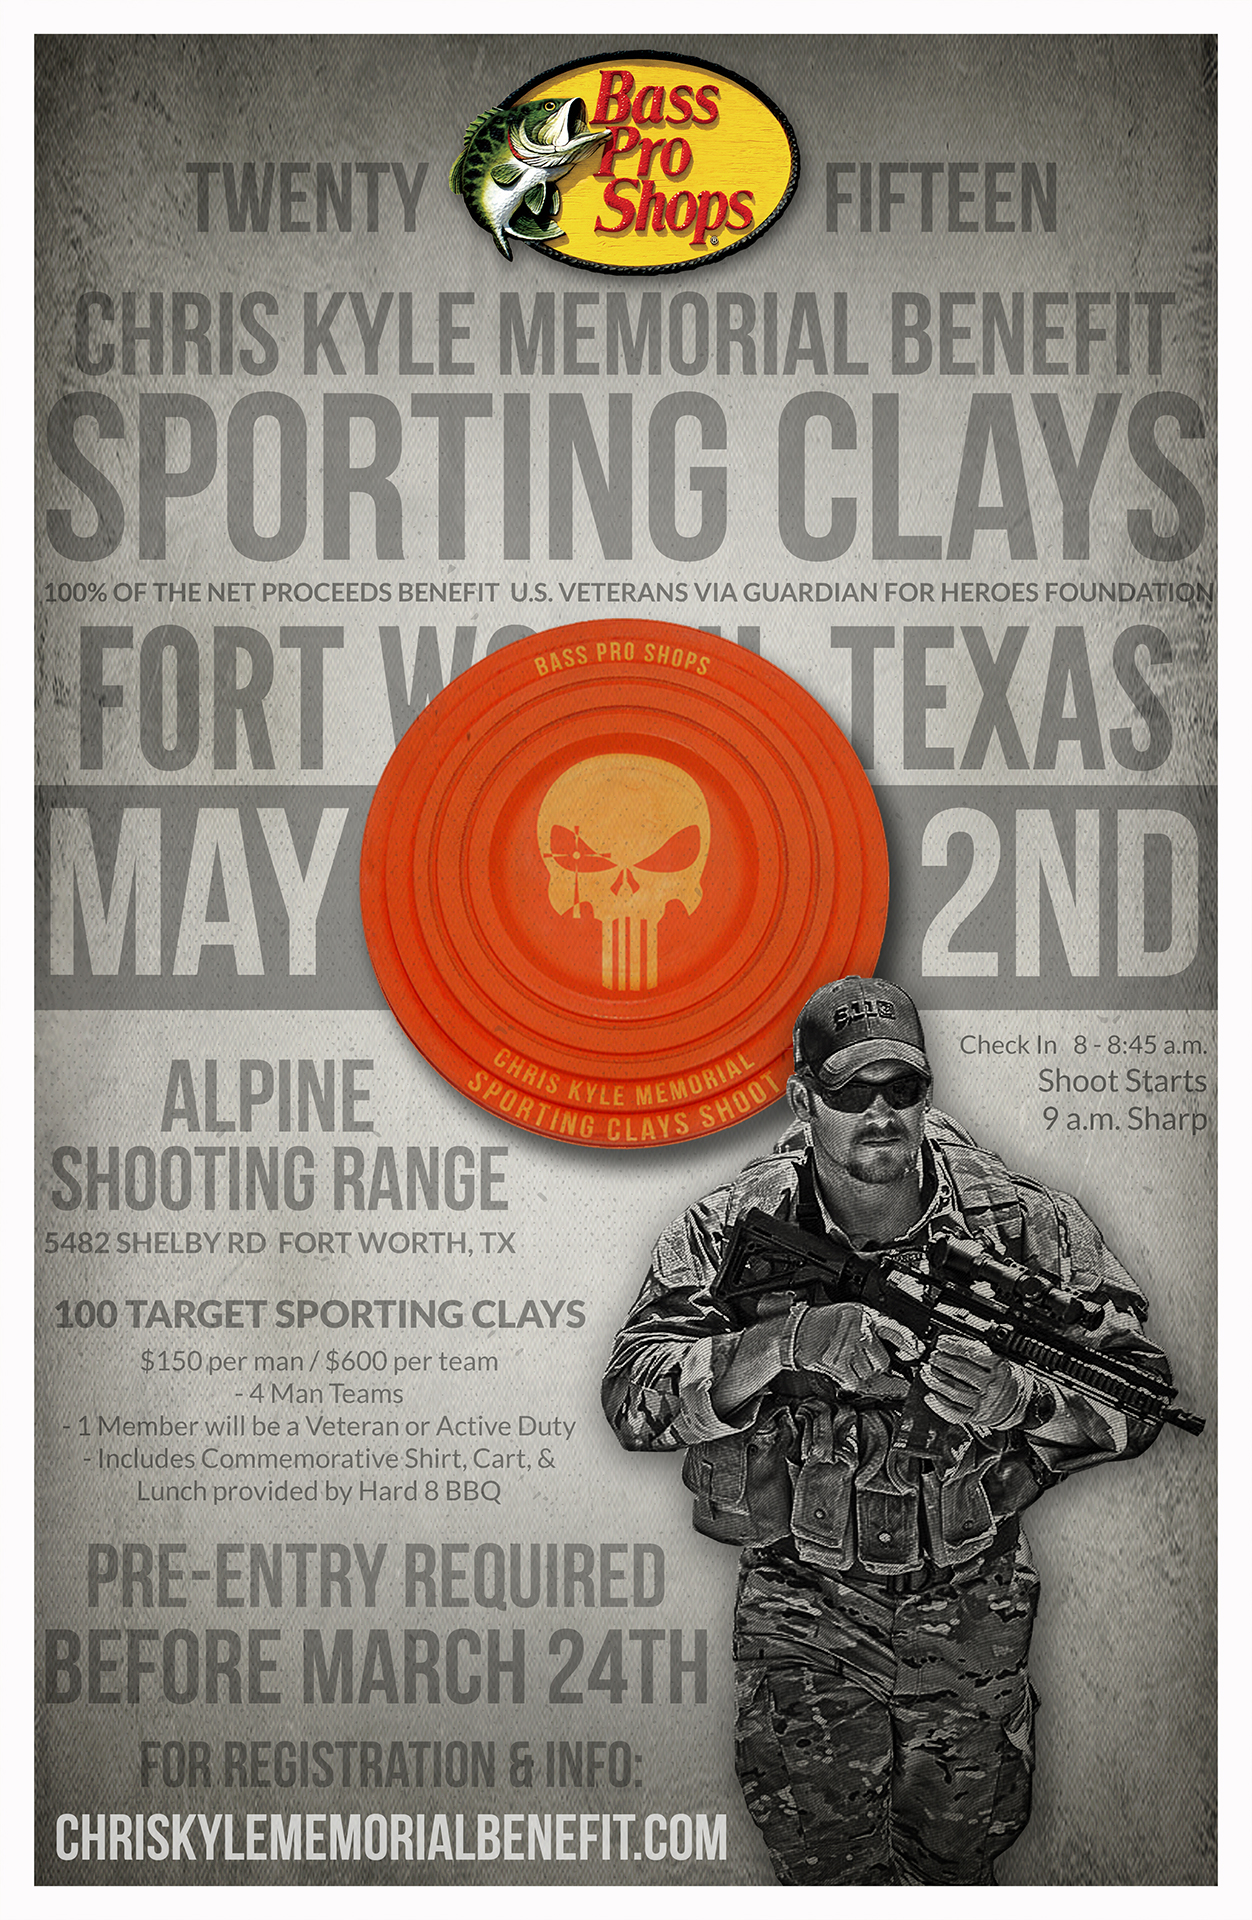 Chris Kyle Memorial Sporting Clays Event Poster